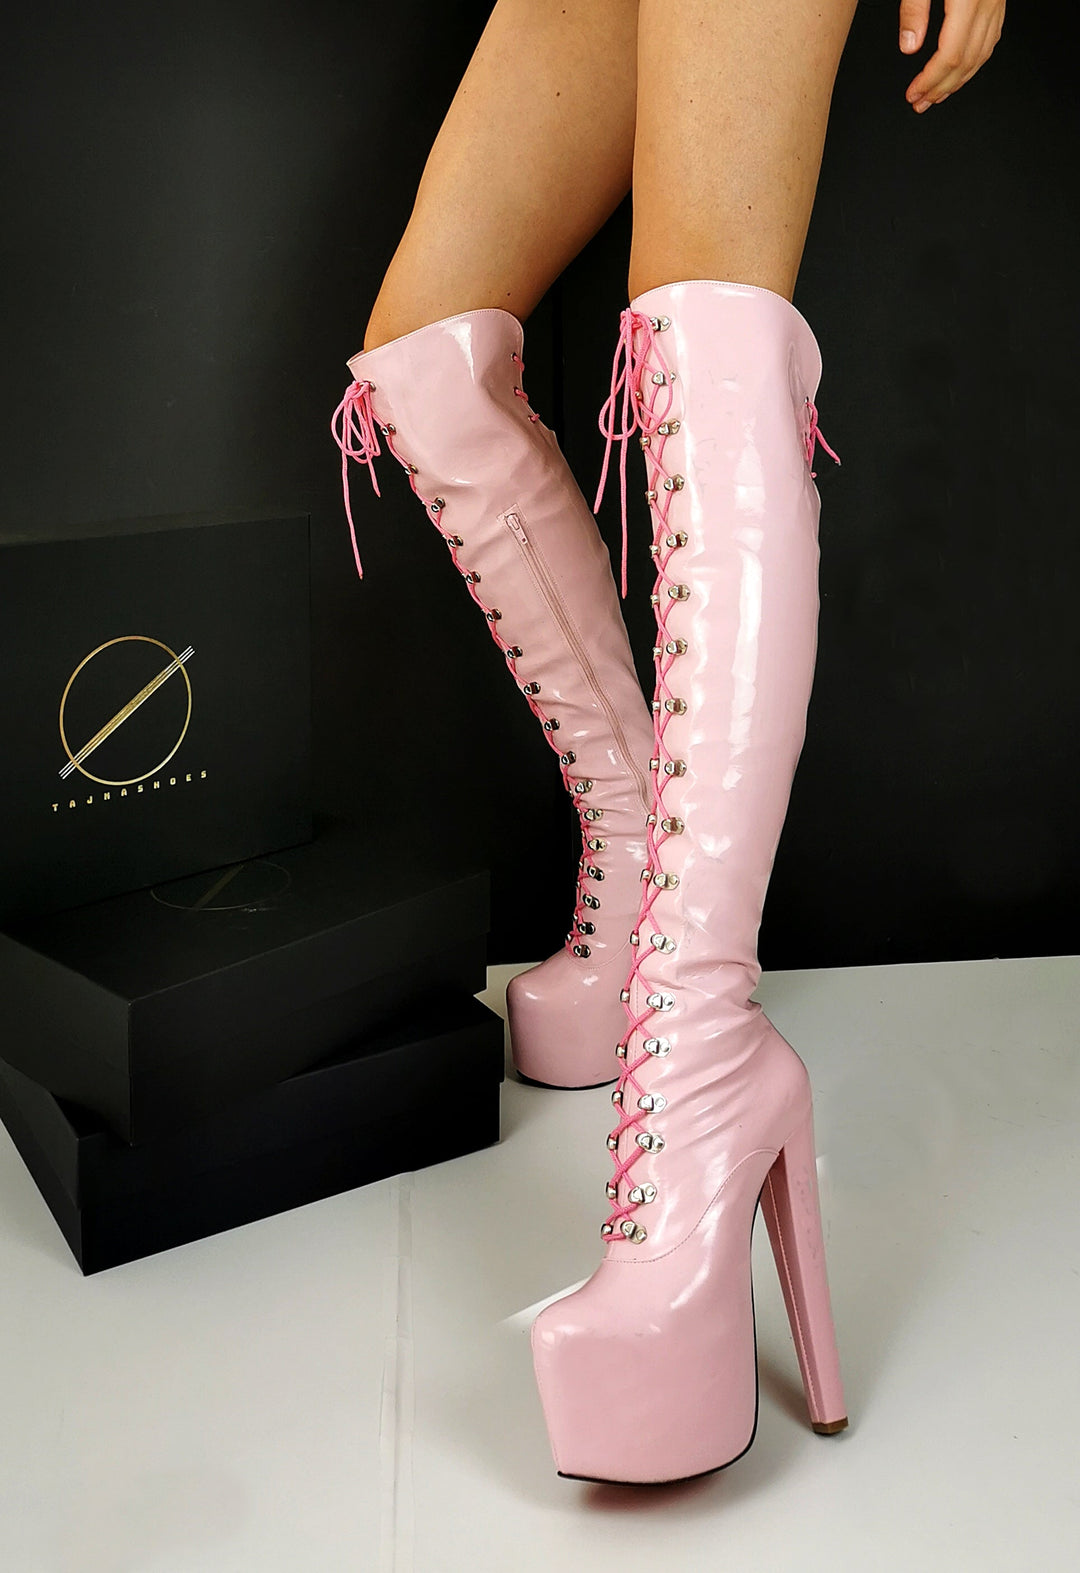 Light Pink Patent Military Style Lace Up Boots - Tajna Club